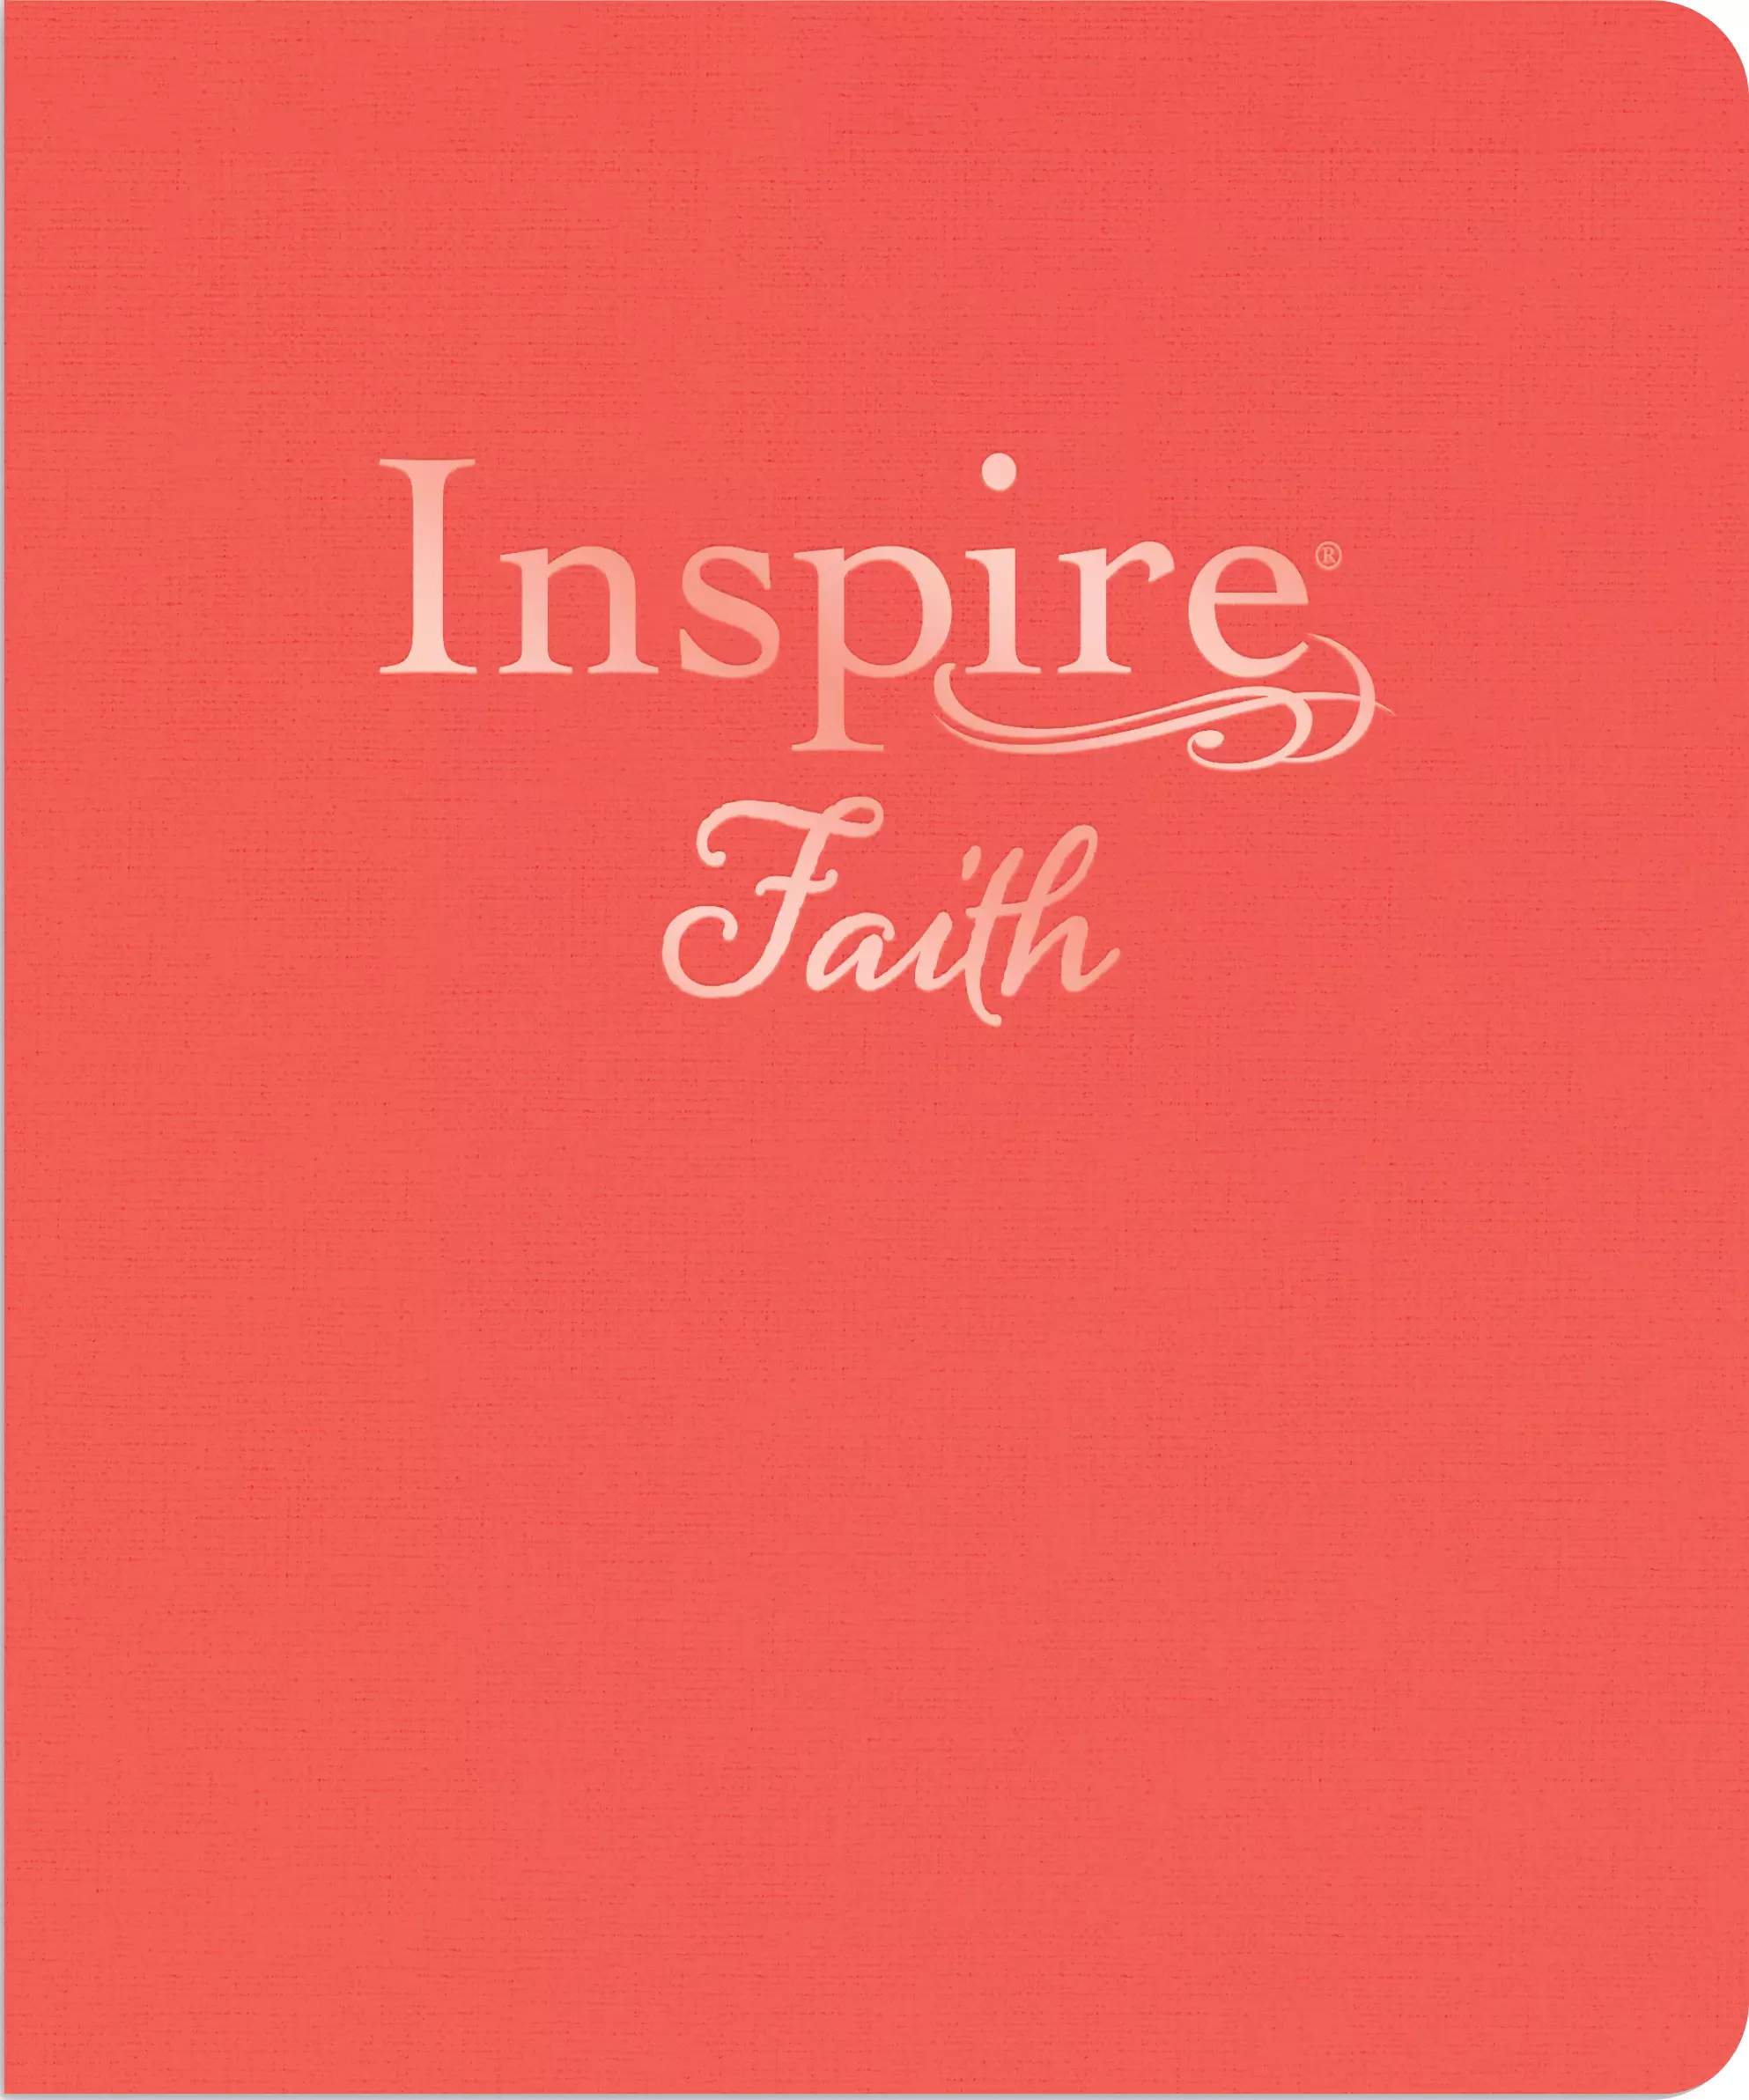 Inspire FAITH Bible Large Print, NLT (Hardcover Cloth, Coral Linen, Filament Enabled)